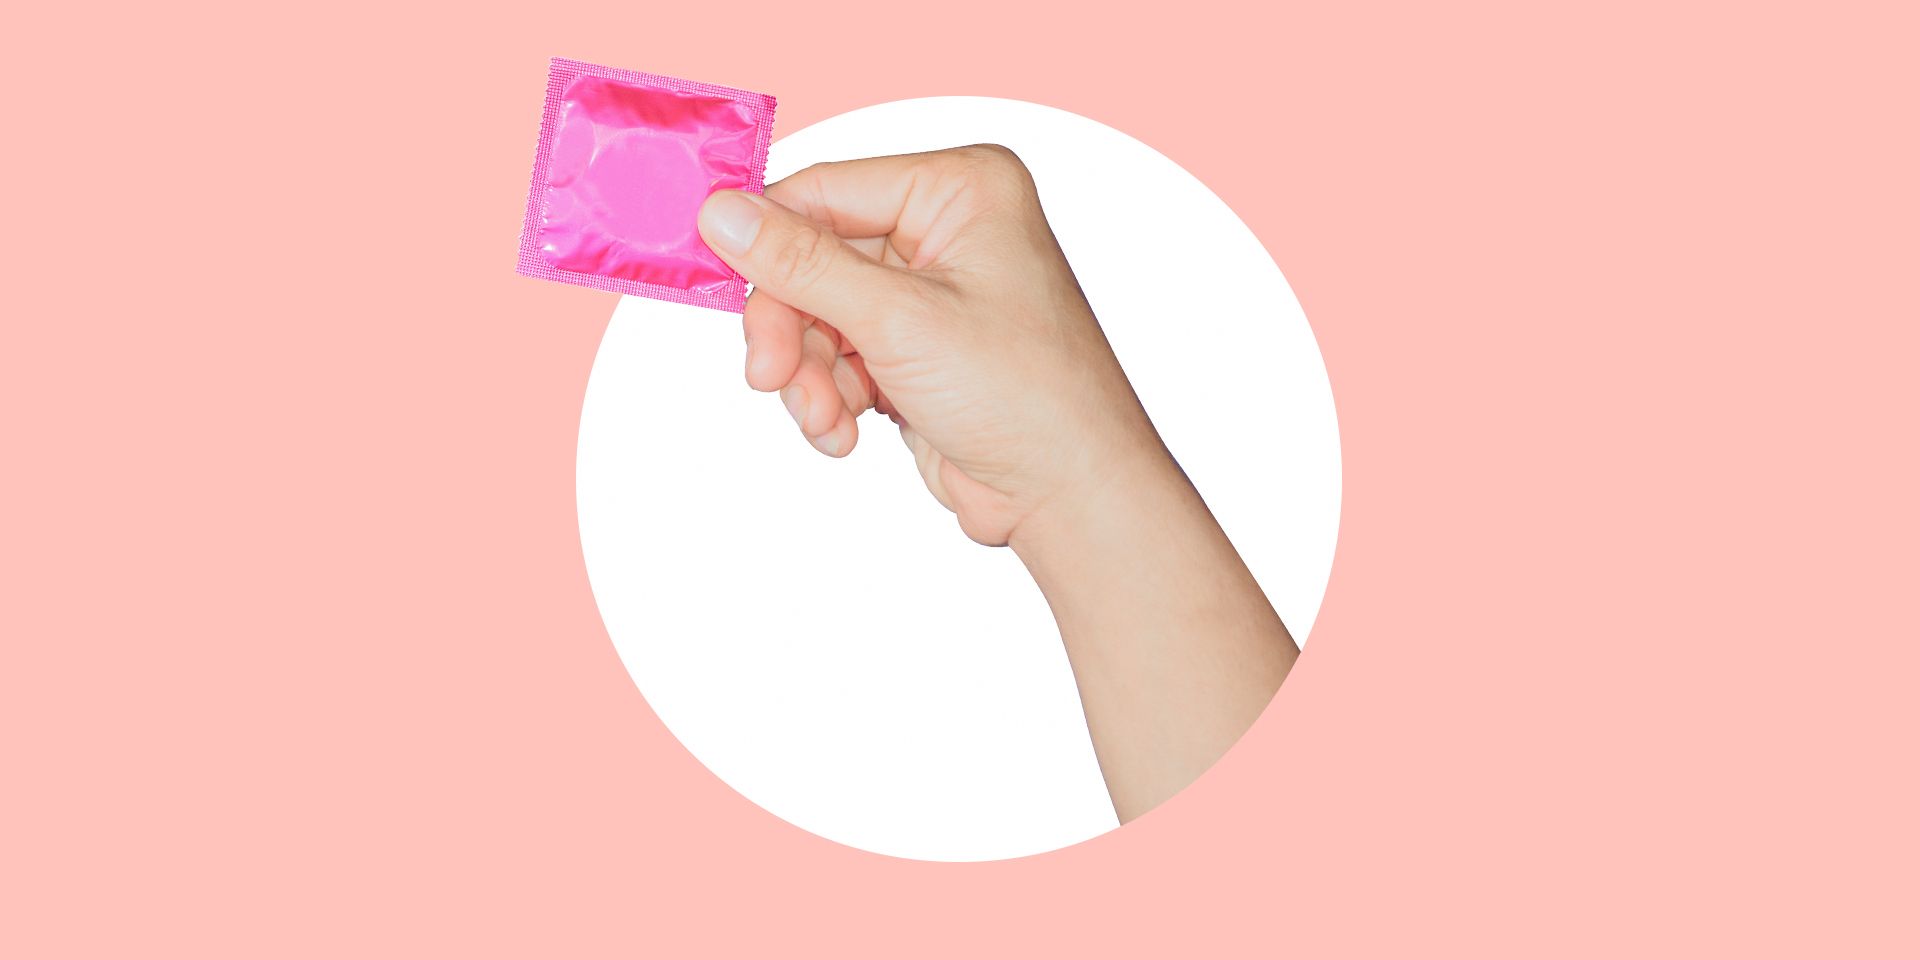 Breaking Condom In Pussy - Why Do Condoms Break During Sex? - What to Do If a Condom Breaks During Sex